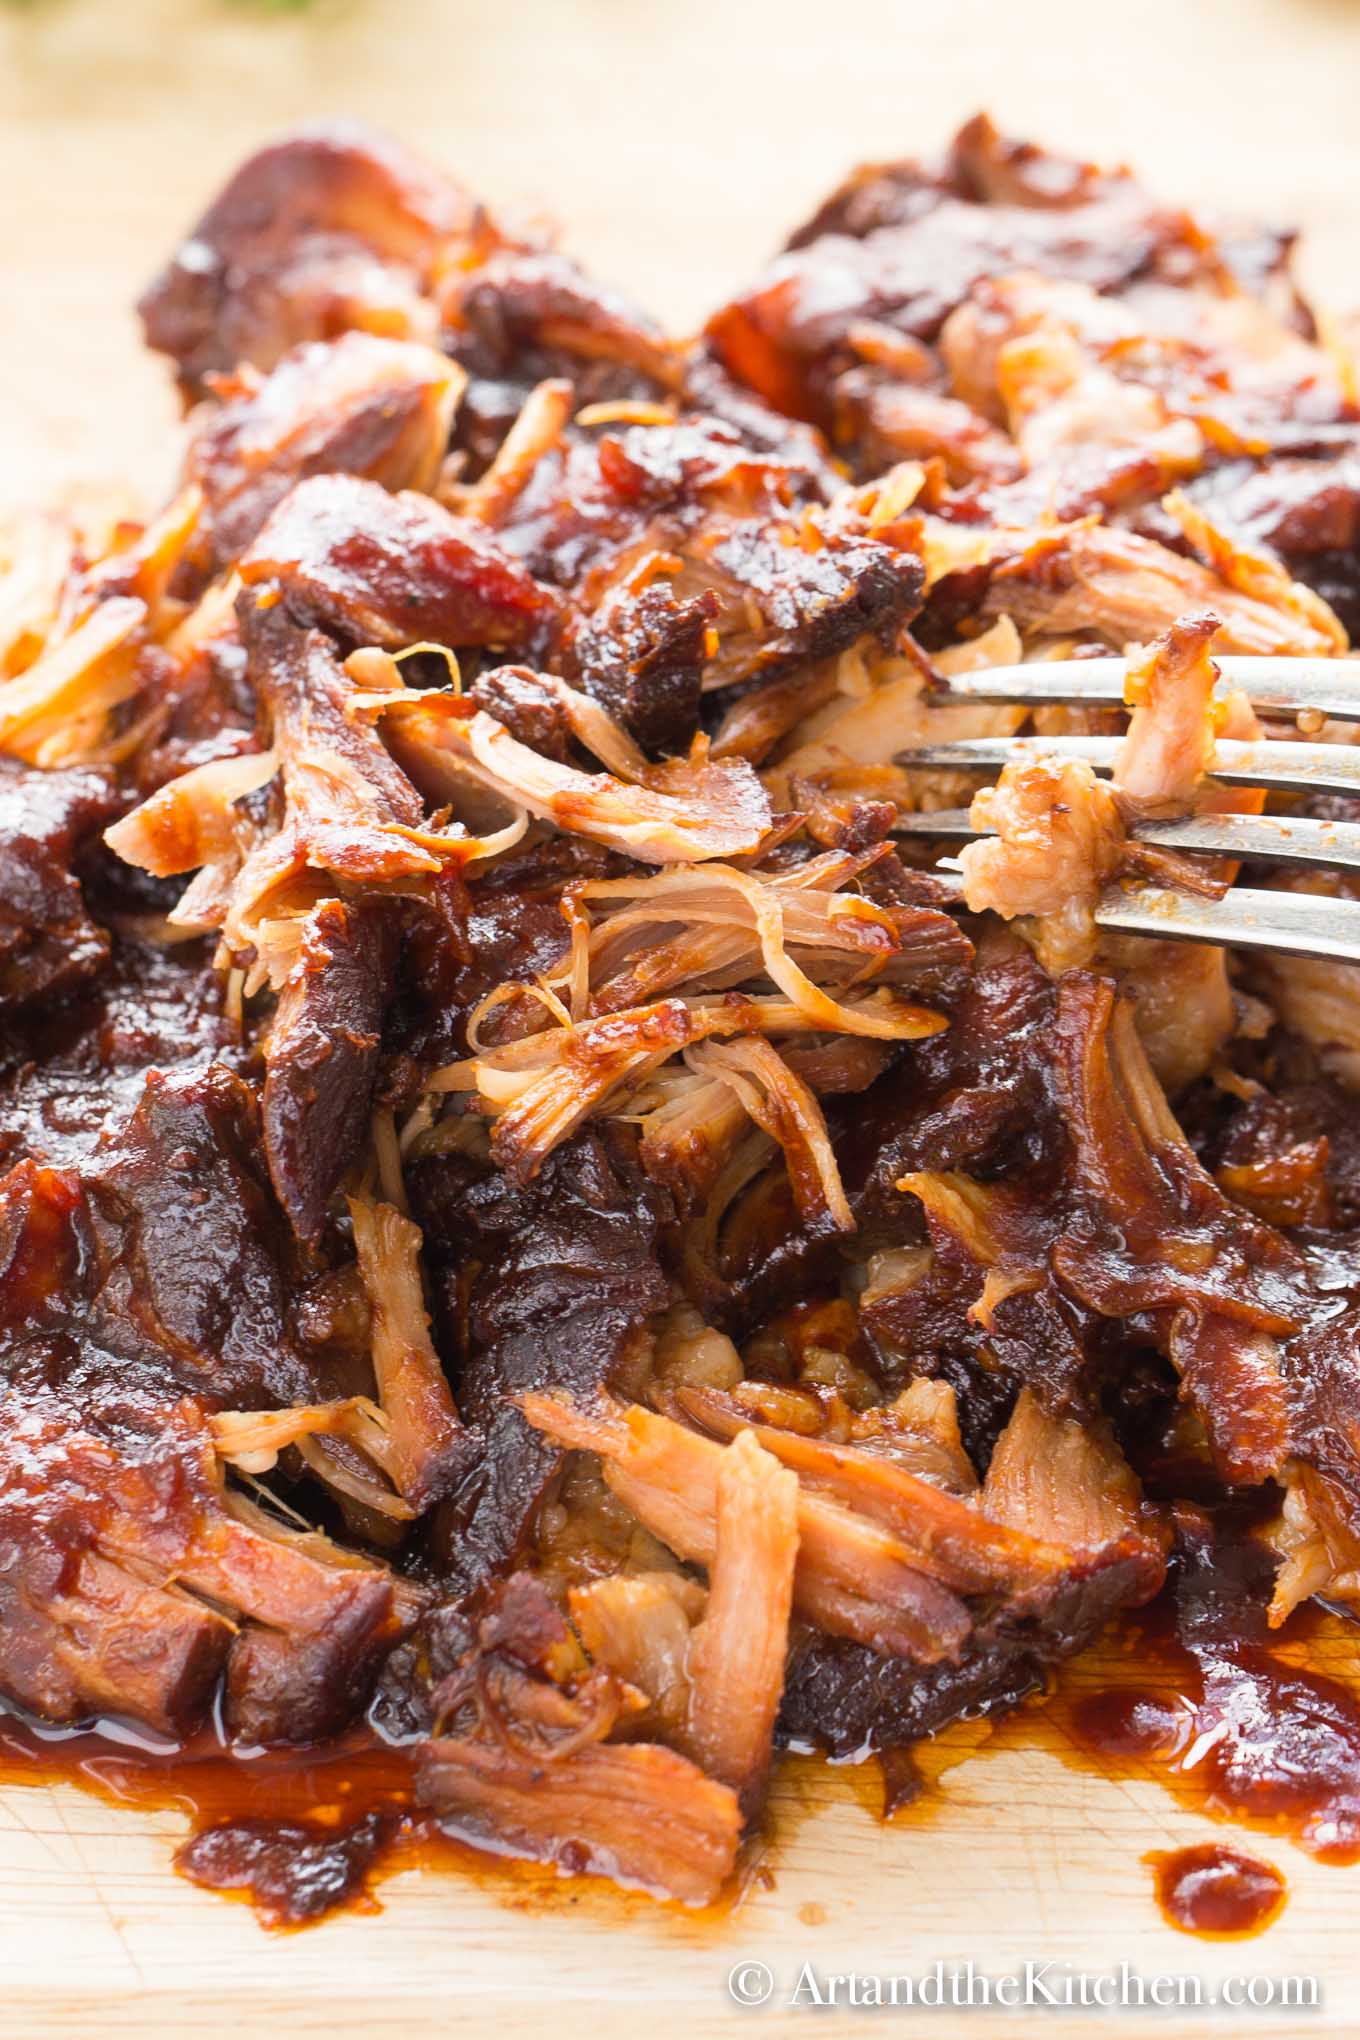 Shredded pulled pork coated in barbecue sauce.